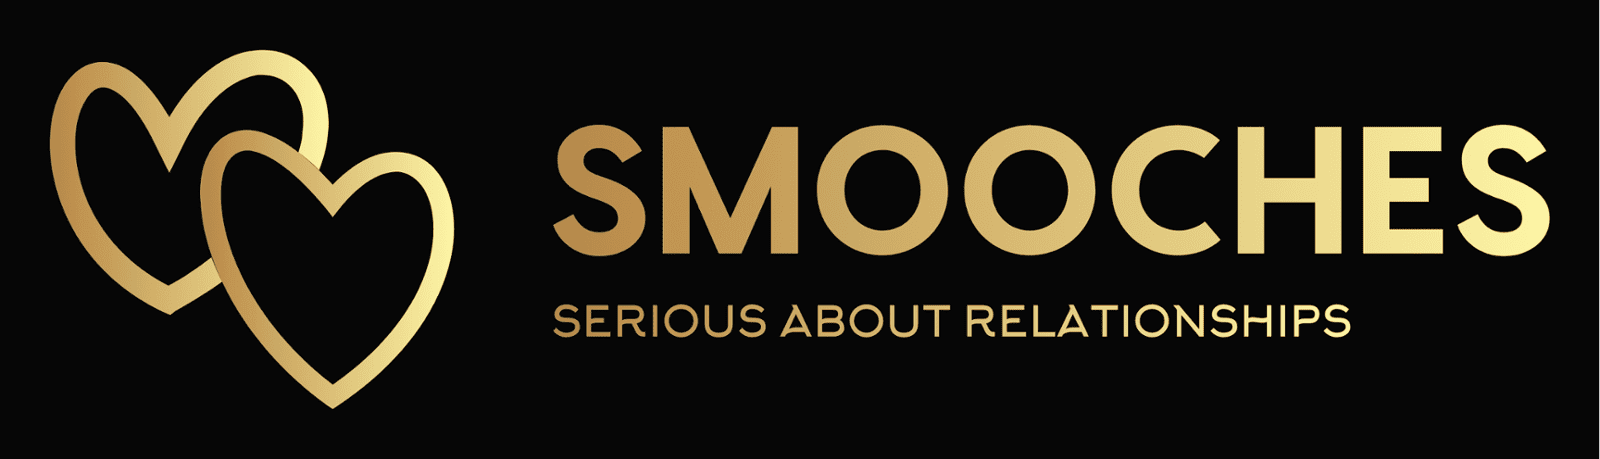 Smooches logo representing serious relationships